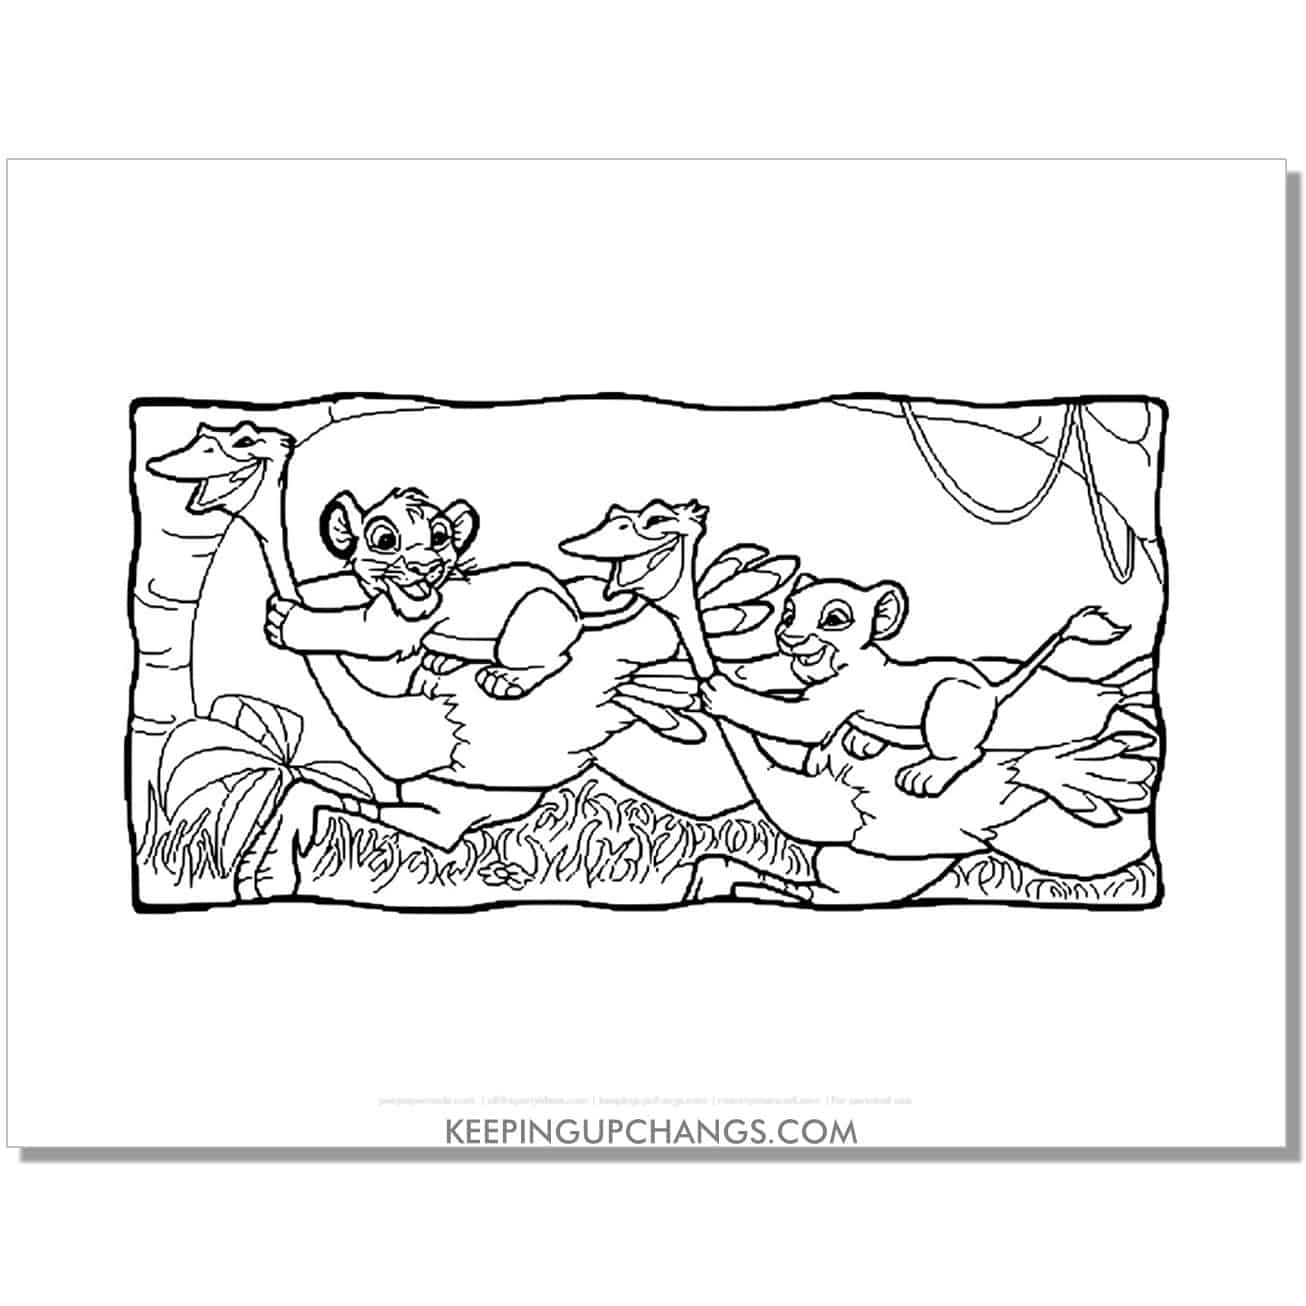 simba and nala riding ostriches lion king coloring page, sheet.